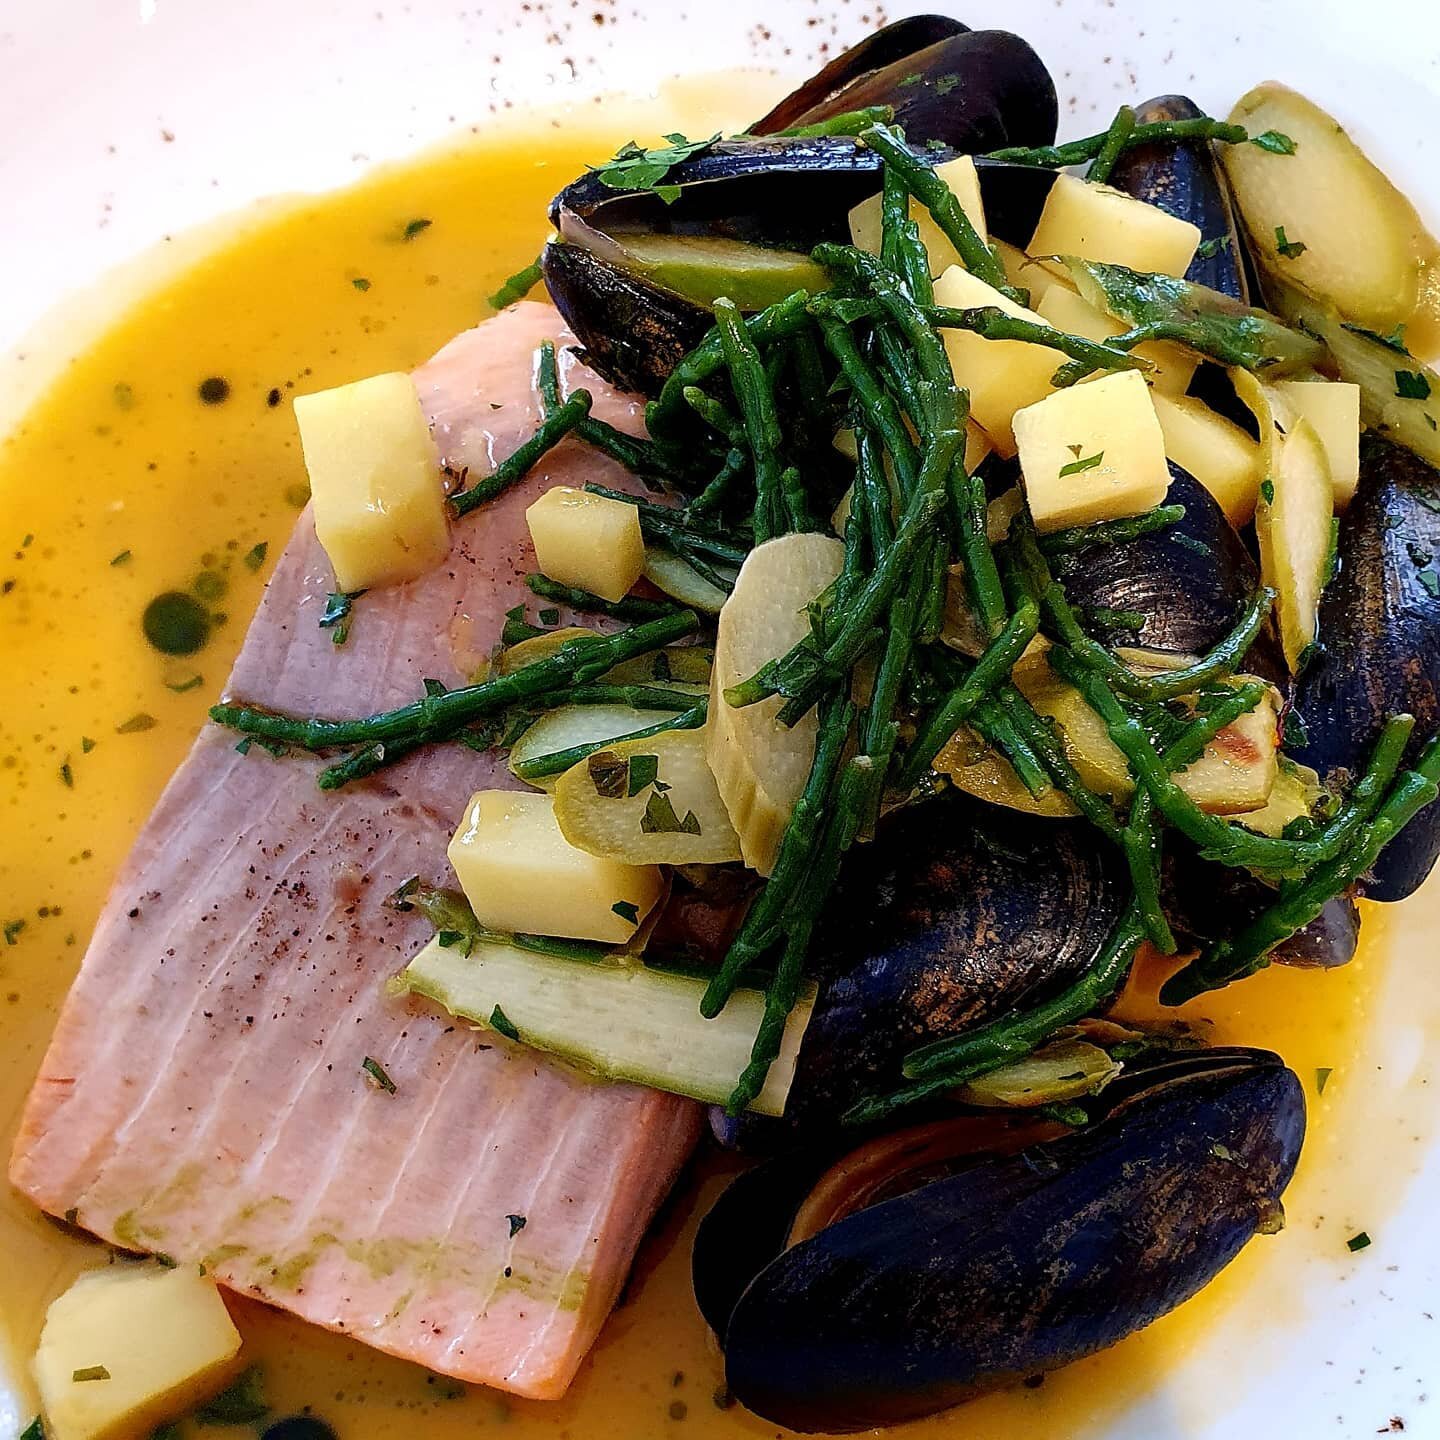 Beautiful olive oil poached trout with mussels, samphire and saffron potatoes @_appletons in Fowey today. So good to be able to eat here again!

#lanticfowey #fowey #appletonsfowey #springmenu